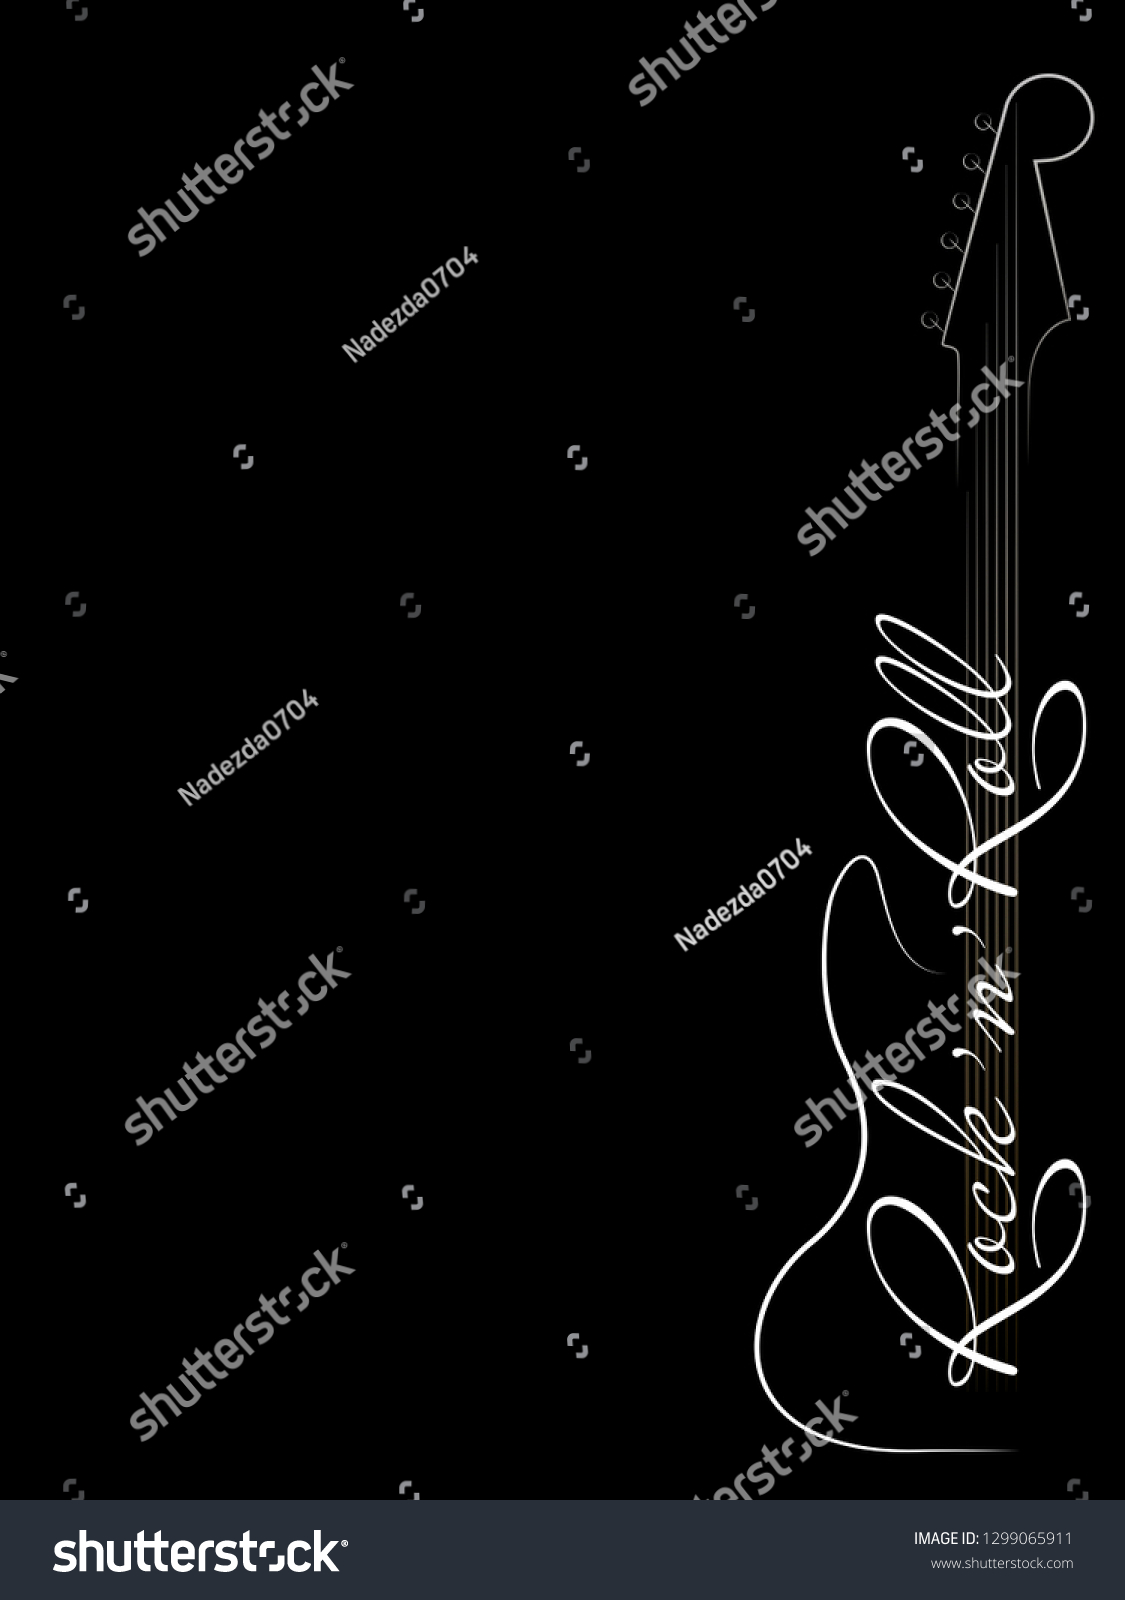 Abstract Musical Logo Black White Music Stock Vector Royalty Free 1299065911